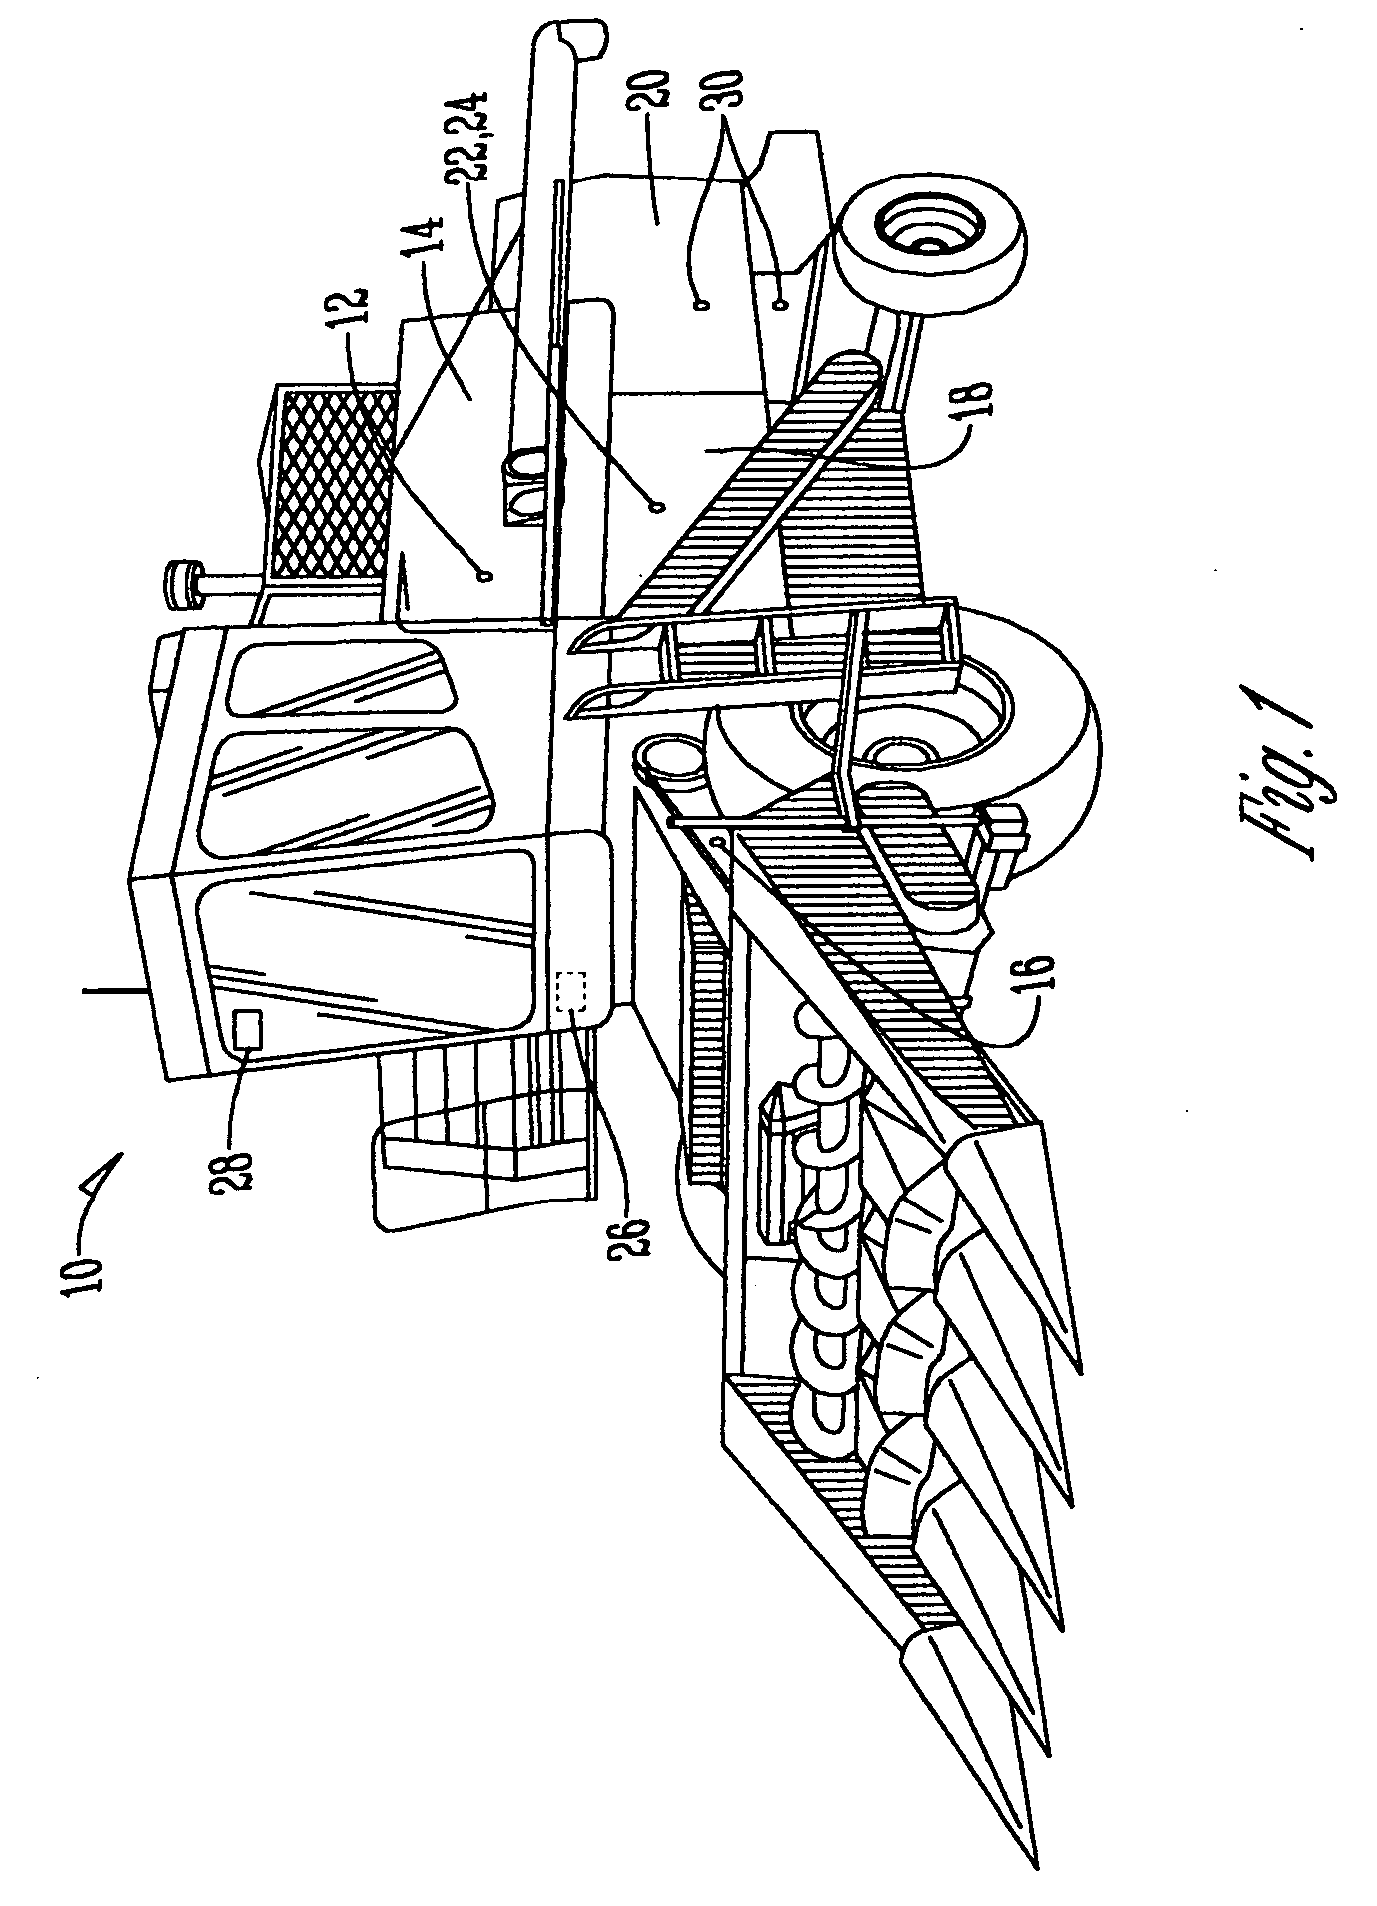 Apparatus and method for monitoring and controlling an agricultural harvesting machine to enhance the economic harvesting performance thereof